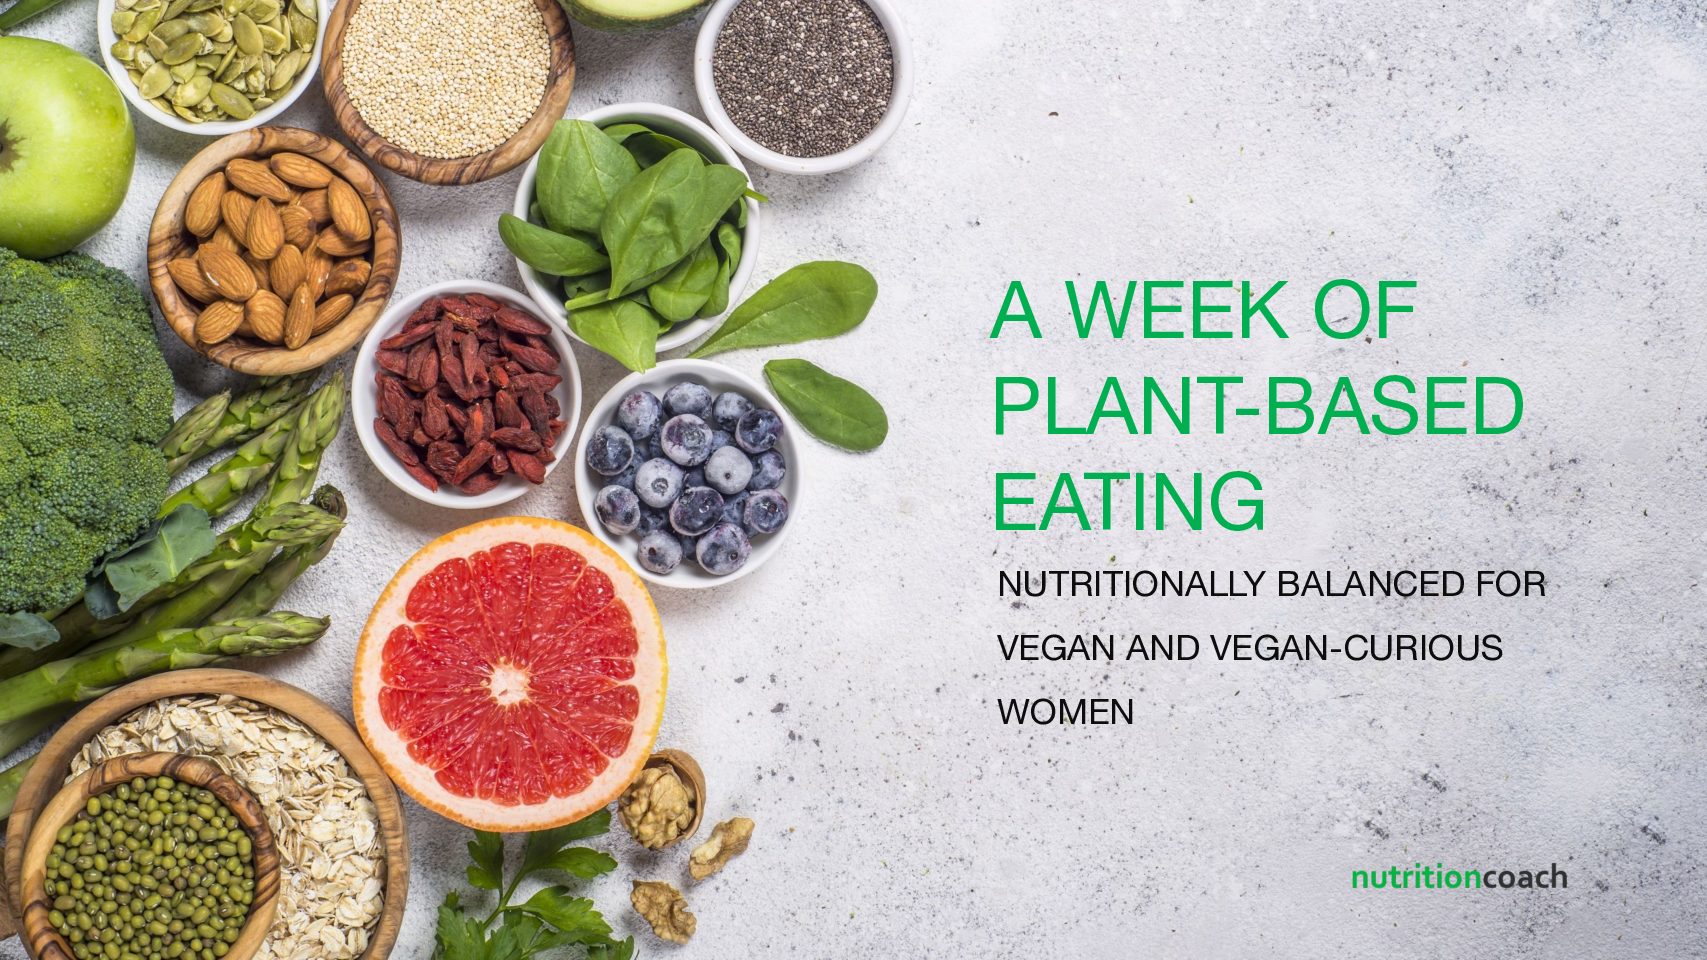 A week of plant-based eating for women (8800 kJ/2100 cal) - nutritioncoach